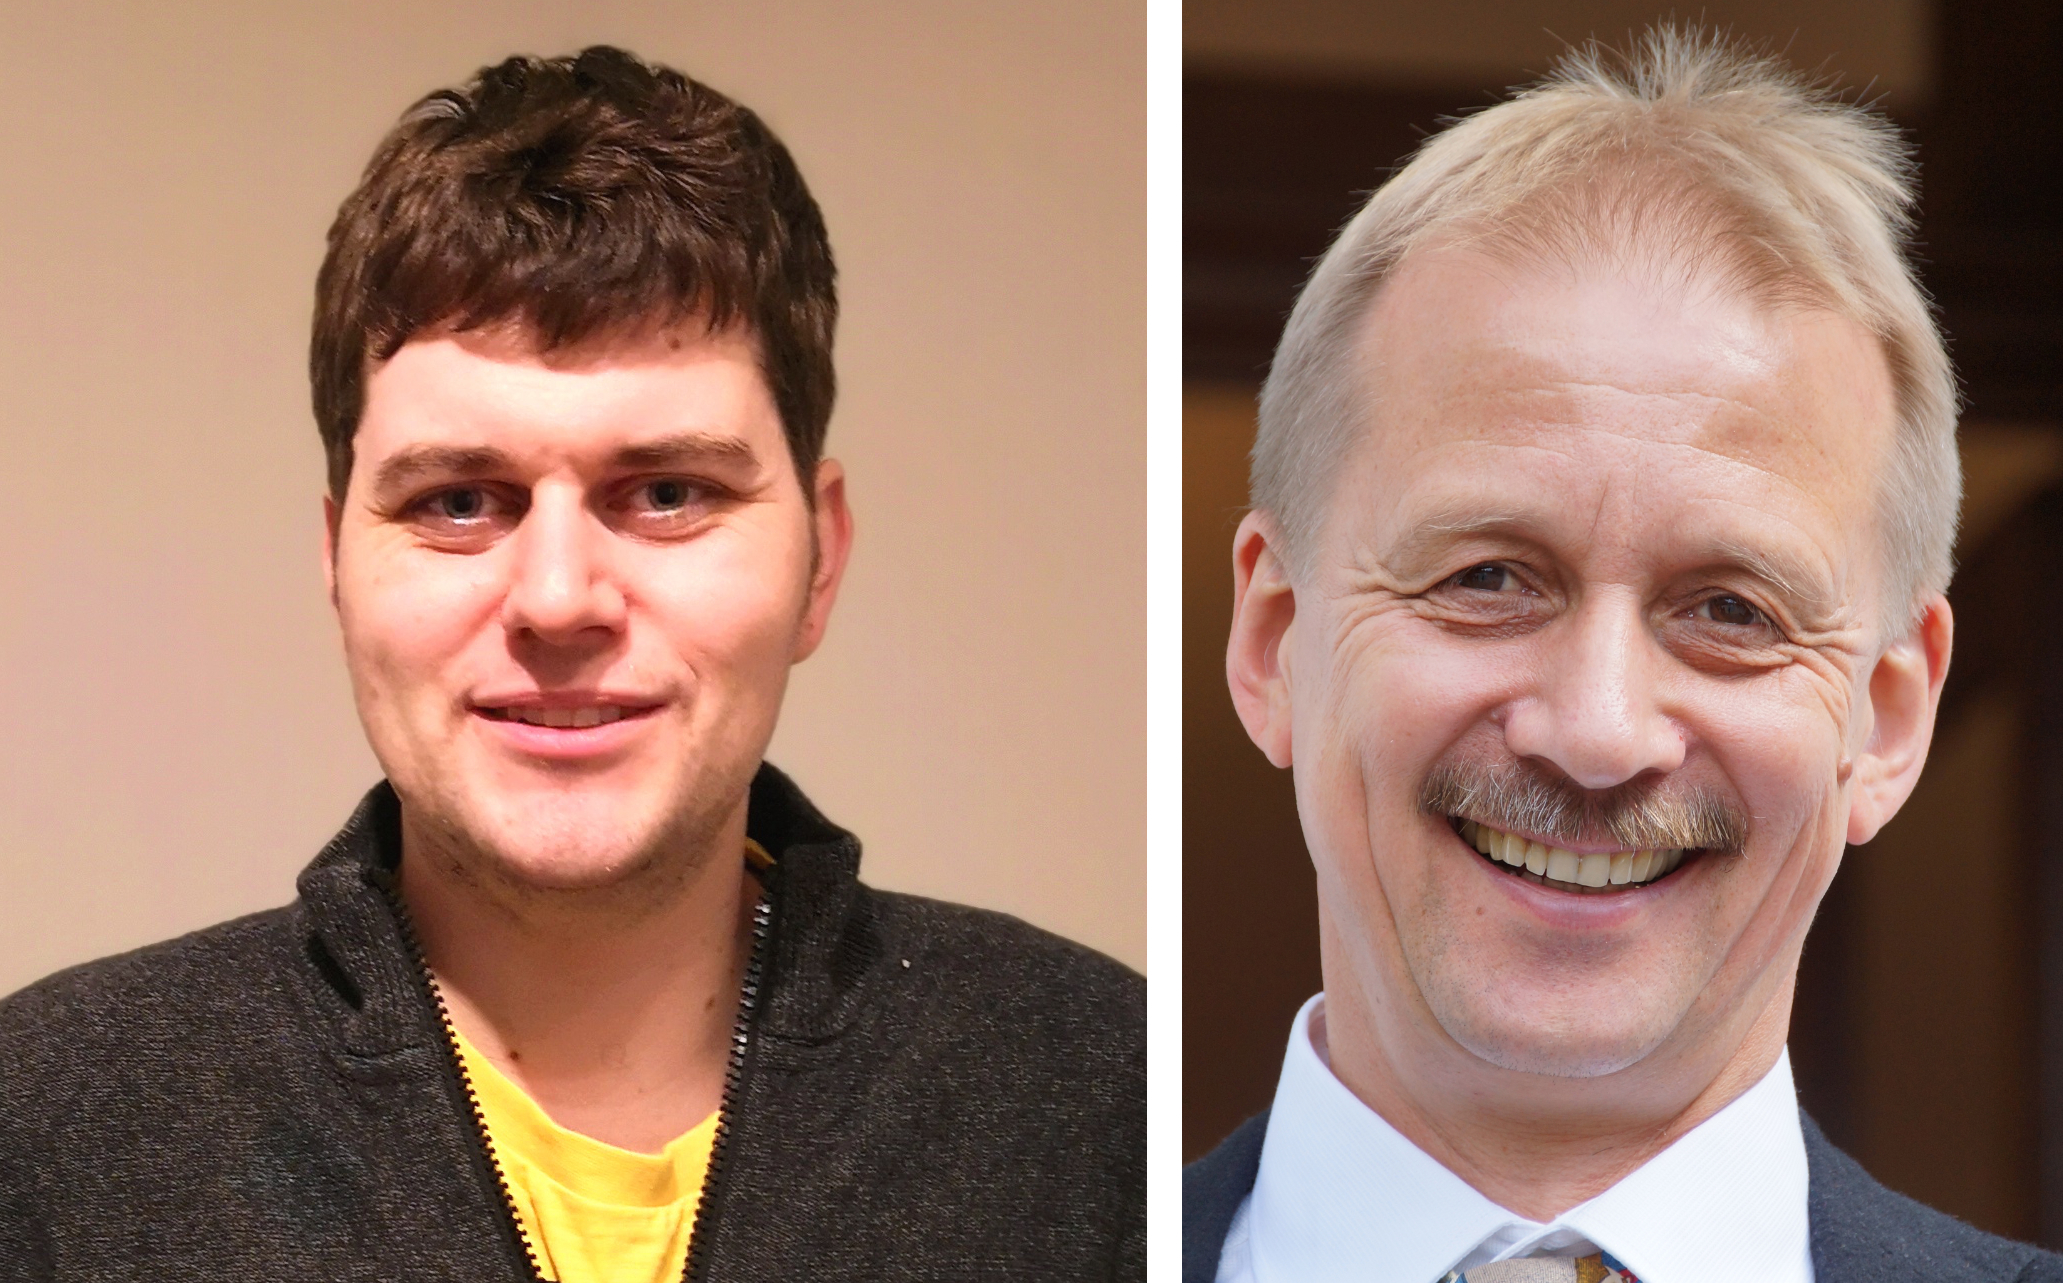 Photos of Prof. Dr. Dieter Jendrossek (right) and Dr. Felix Becker (left).